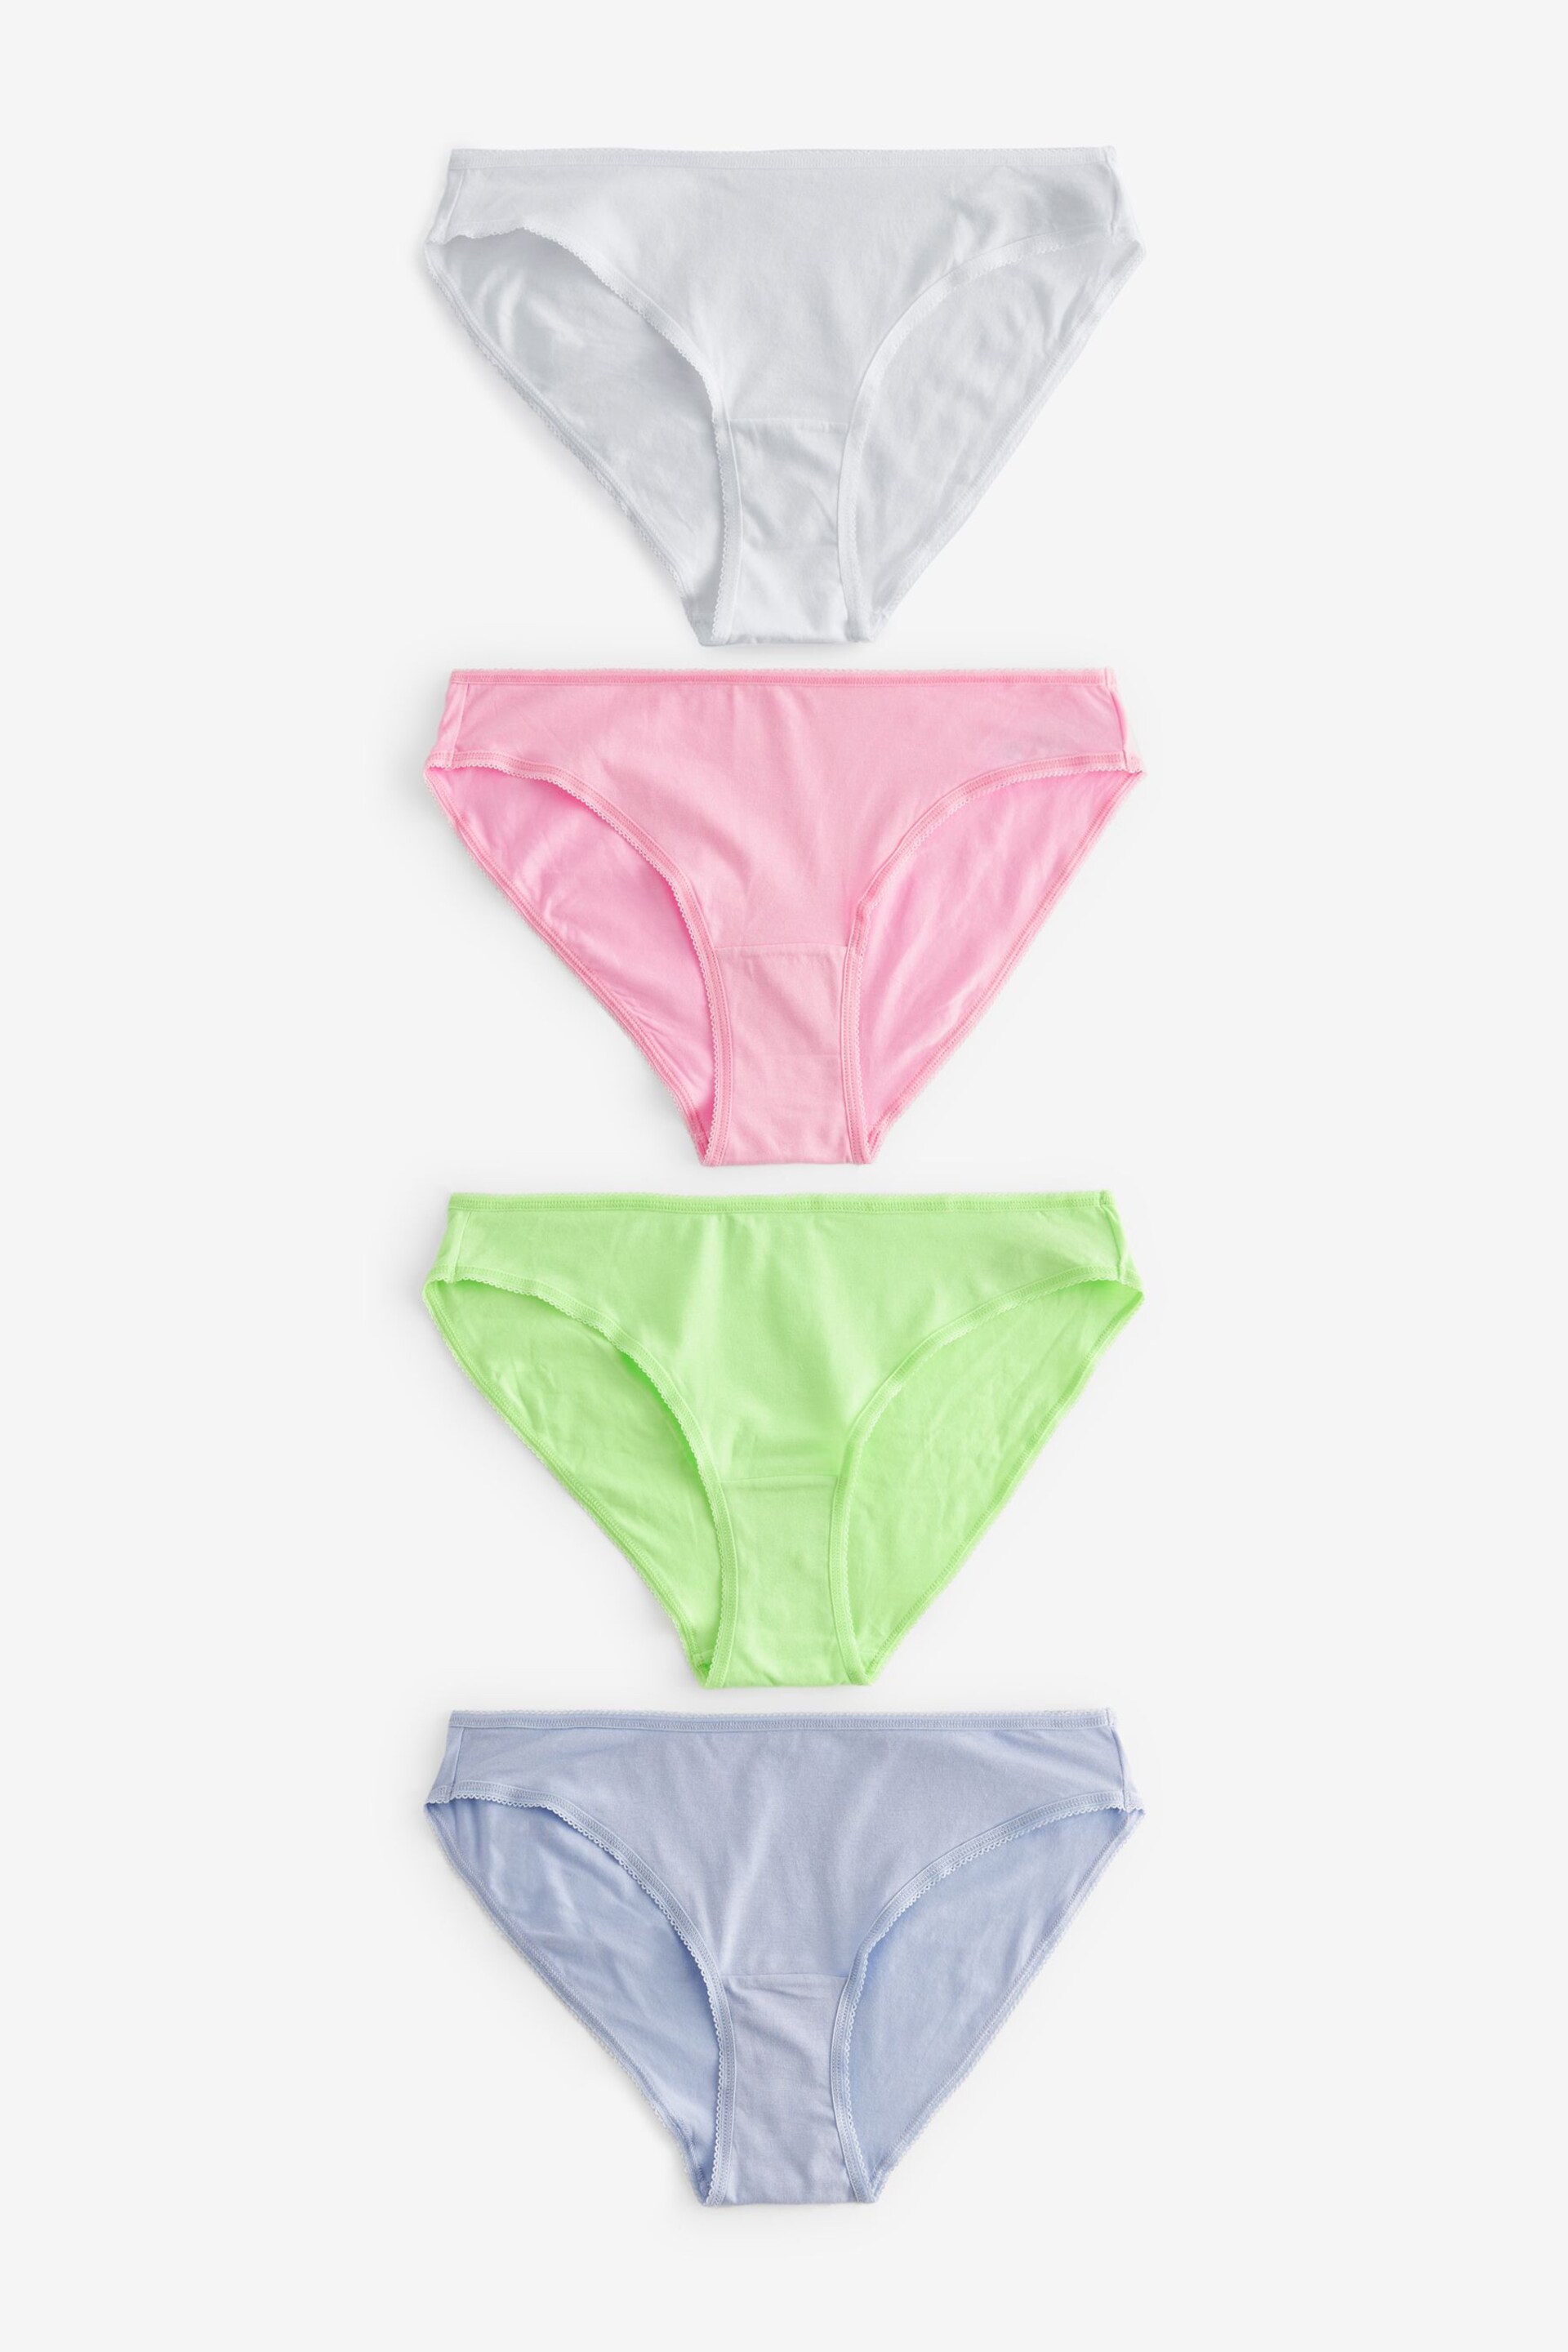 Pink/Lilac/Green/White High Leg Cotton Rich Knickers 4 Pack - Image 1 of 4